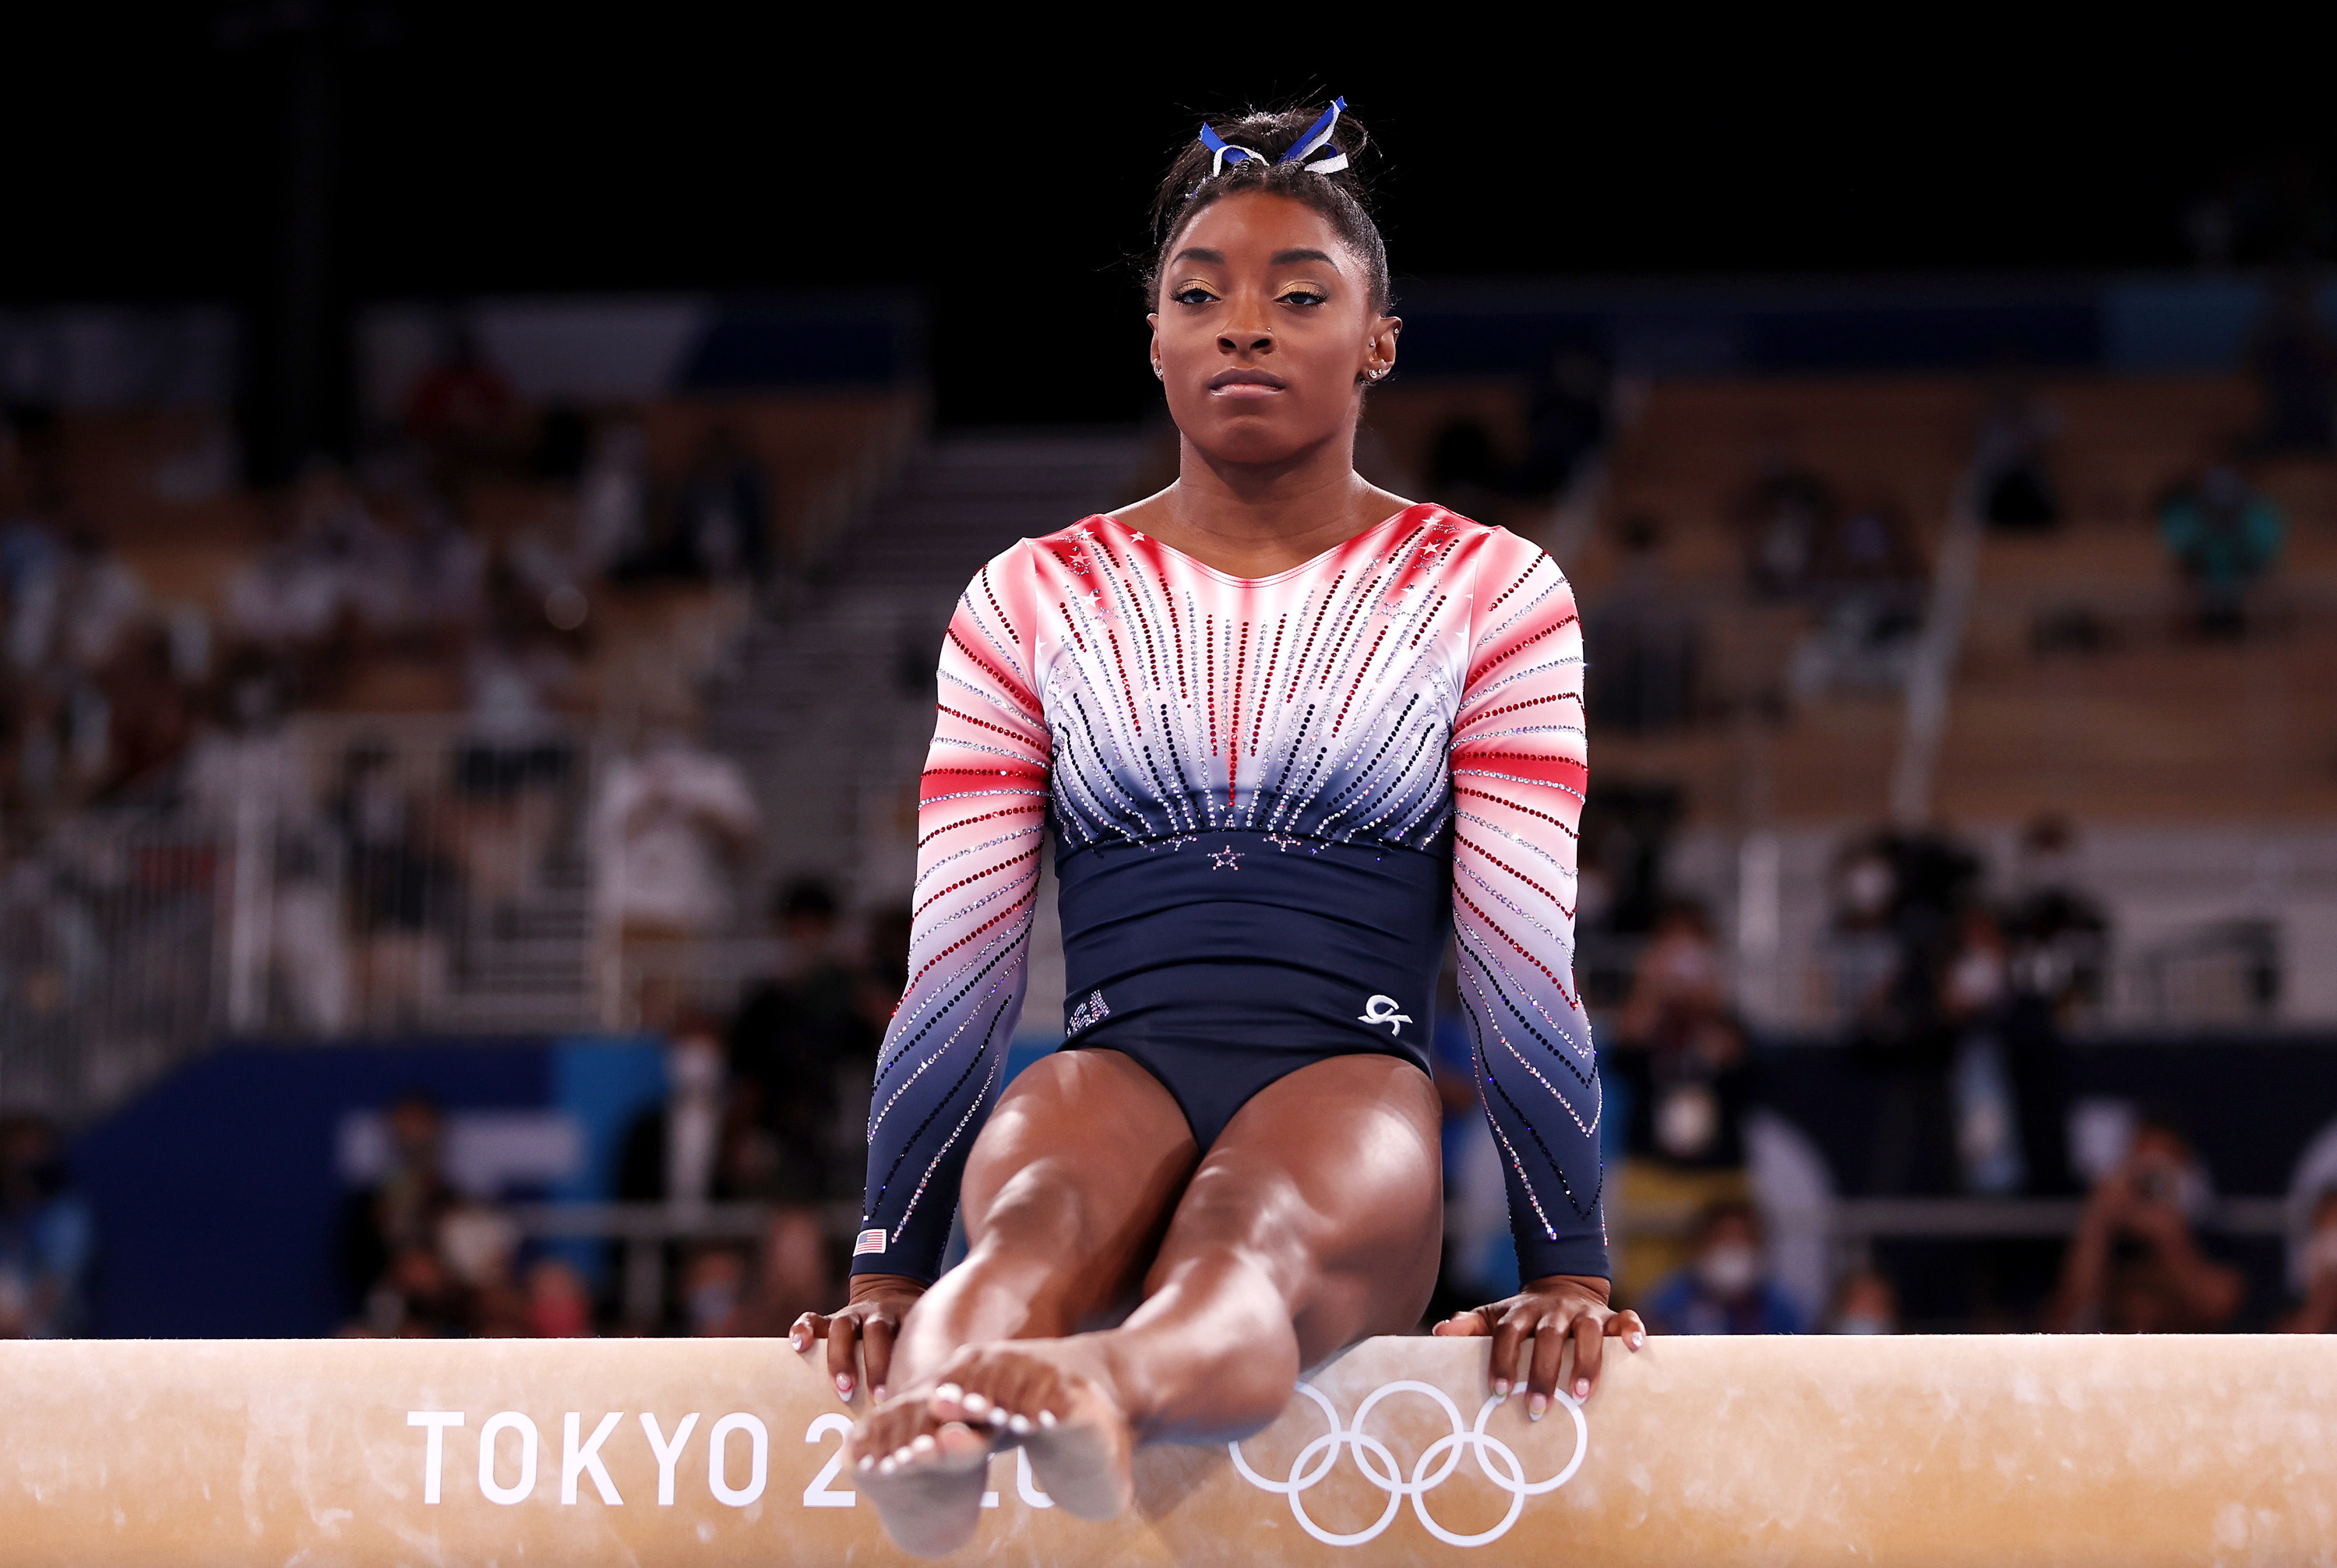 Biles in a seated position on the balance beam with her hands on the beam